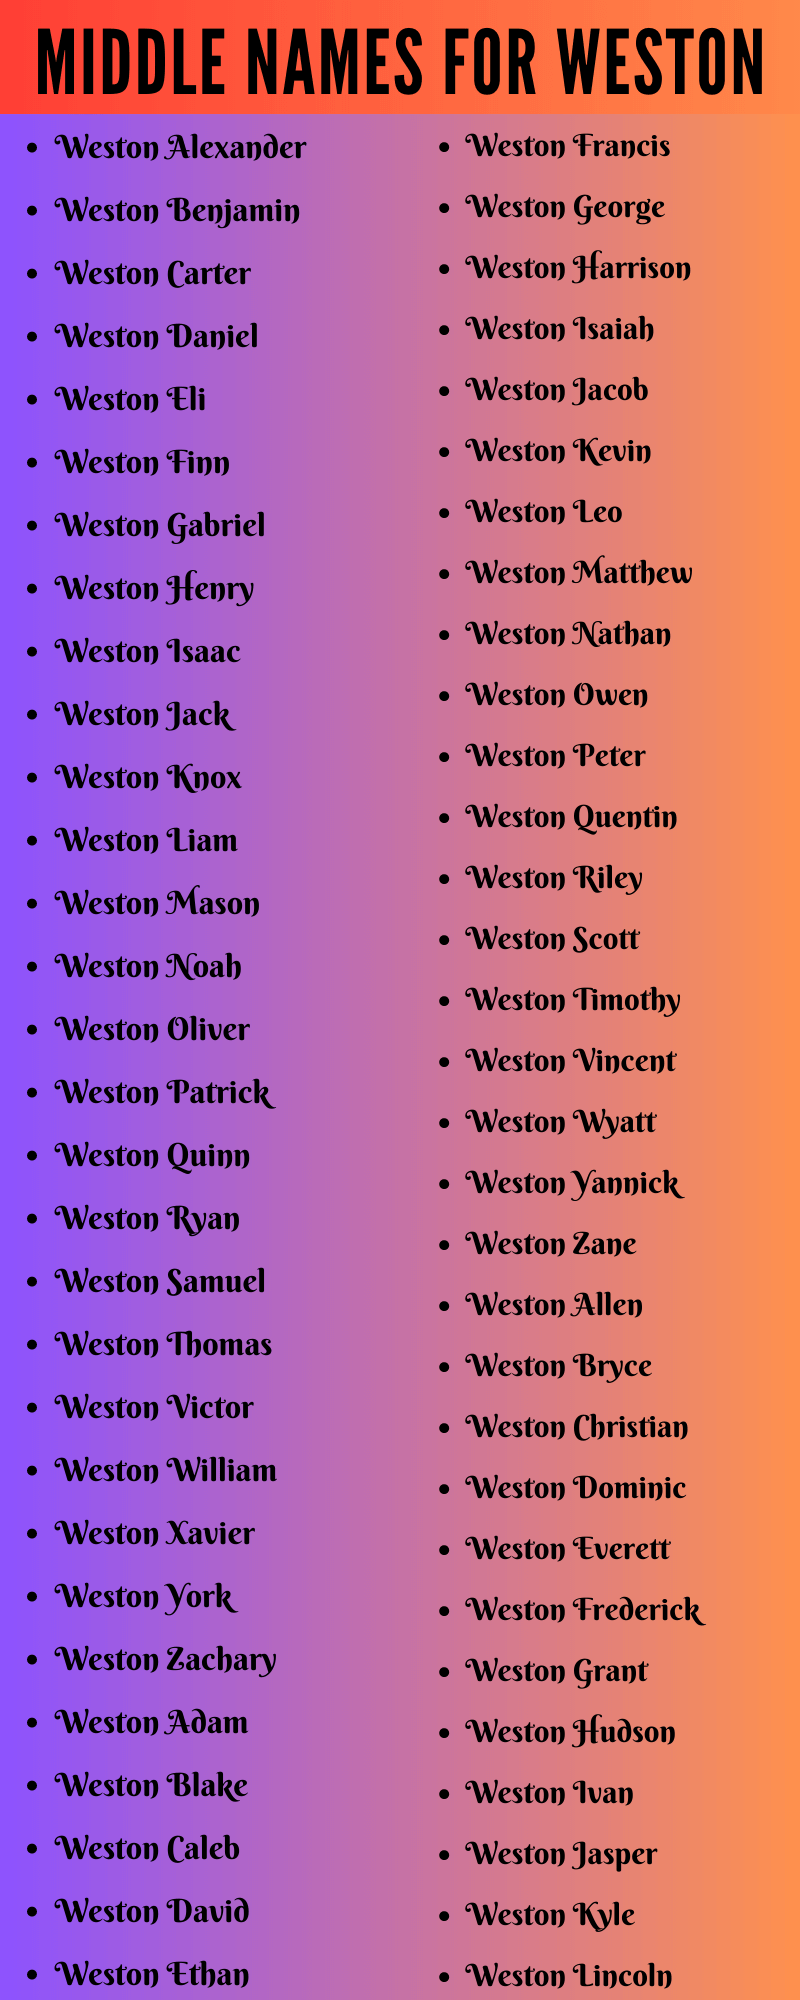 400 Catchy Middle Names For Weston That You Will Like